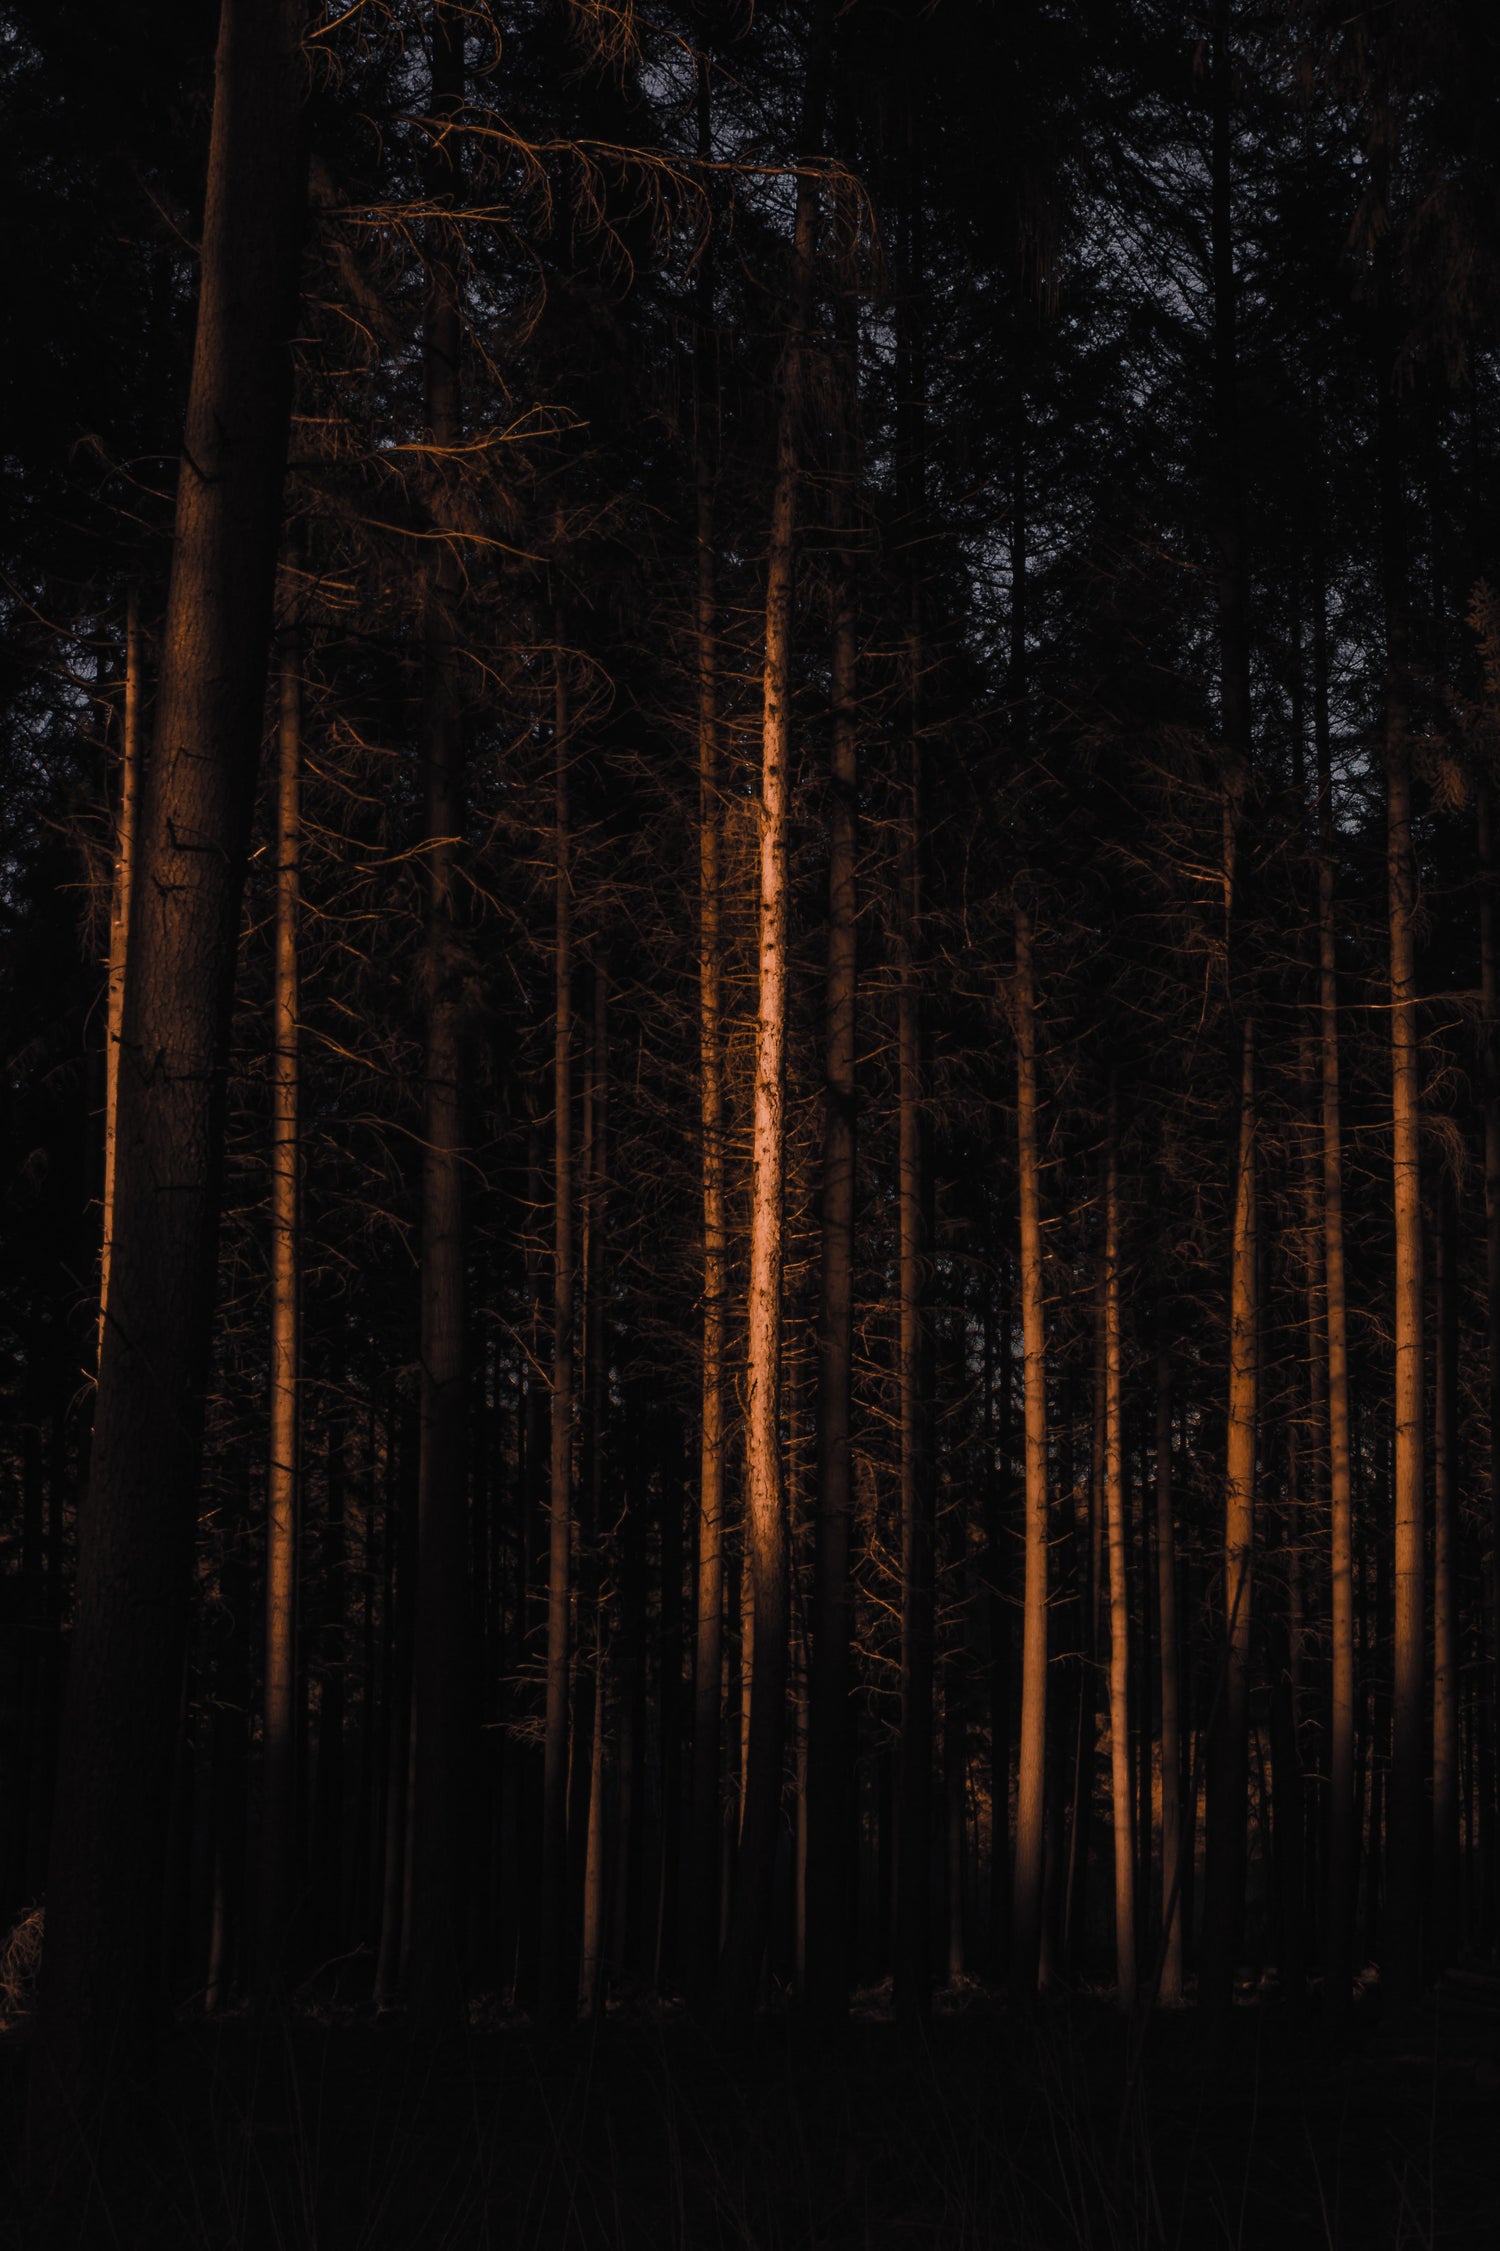 Image of trees with a hue of light reflecting on the trunk of the trees. An late evening night peaking through the top of the trees.